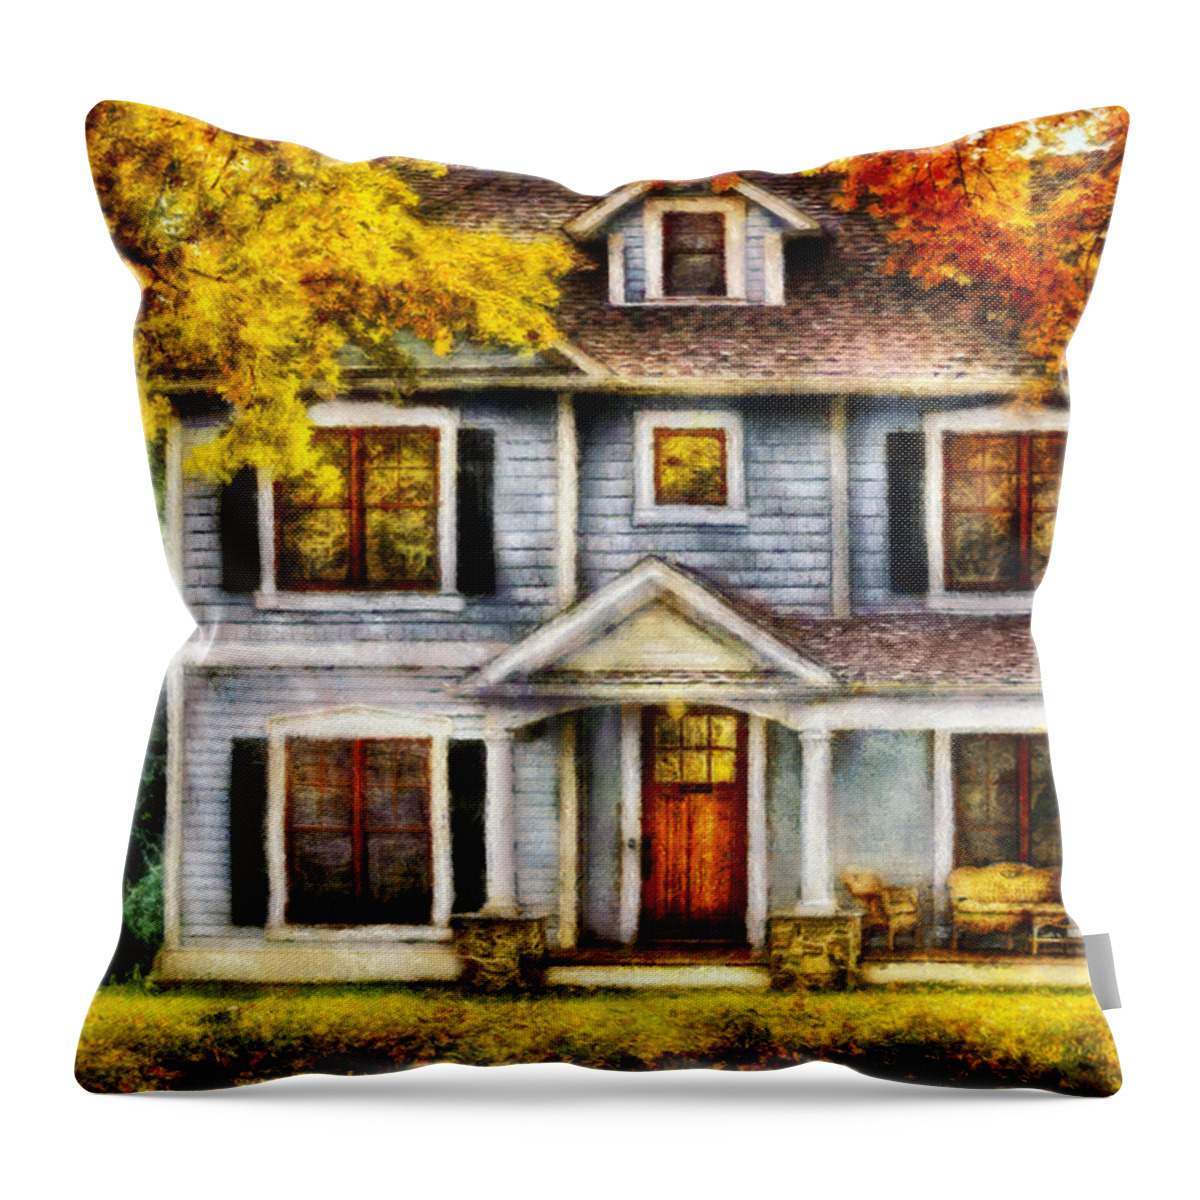 Savad Throw Pillow featuring the photograph Autumn - House - Cottage by Mike Savad